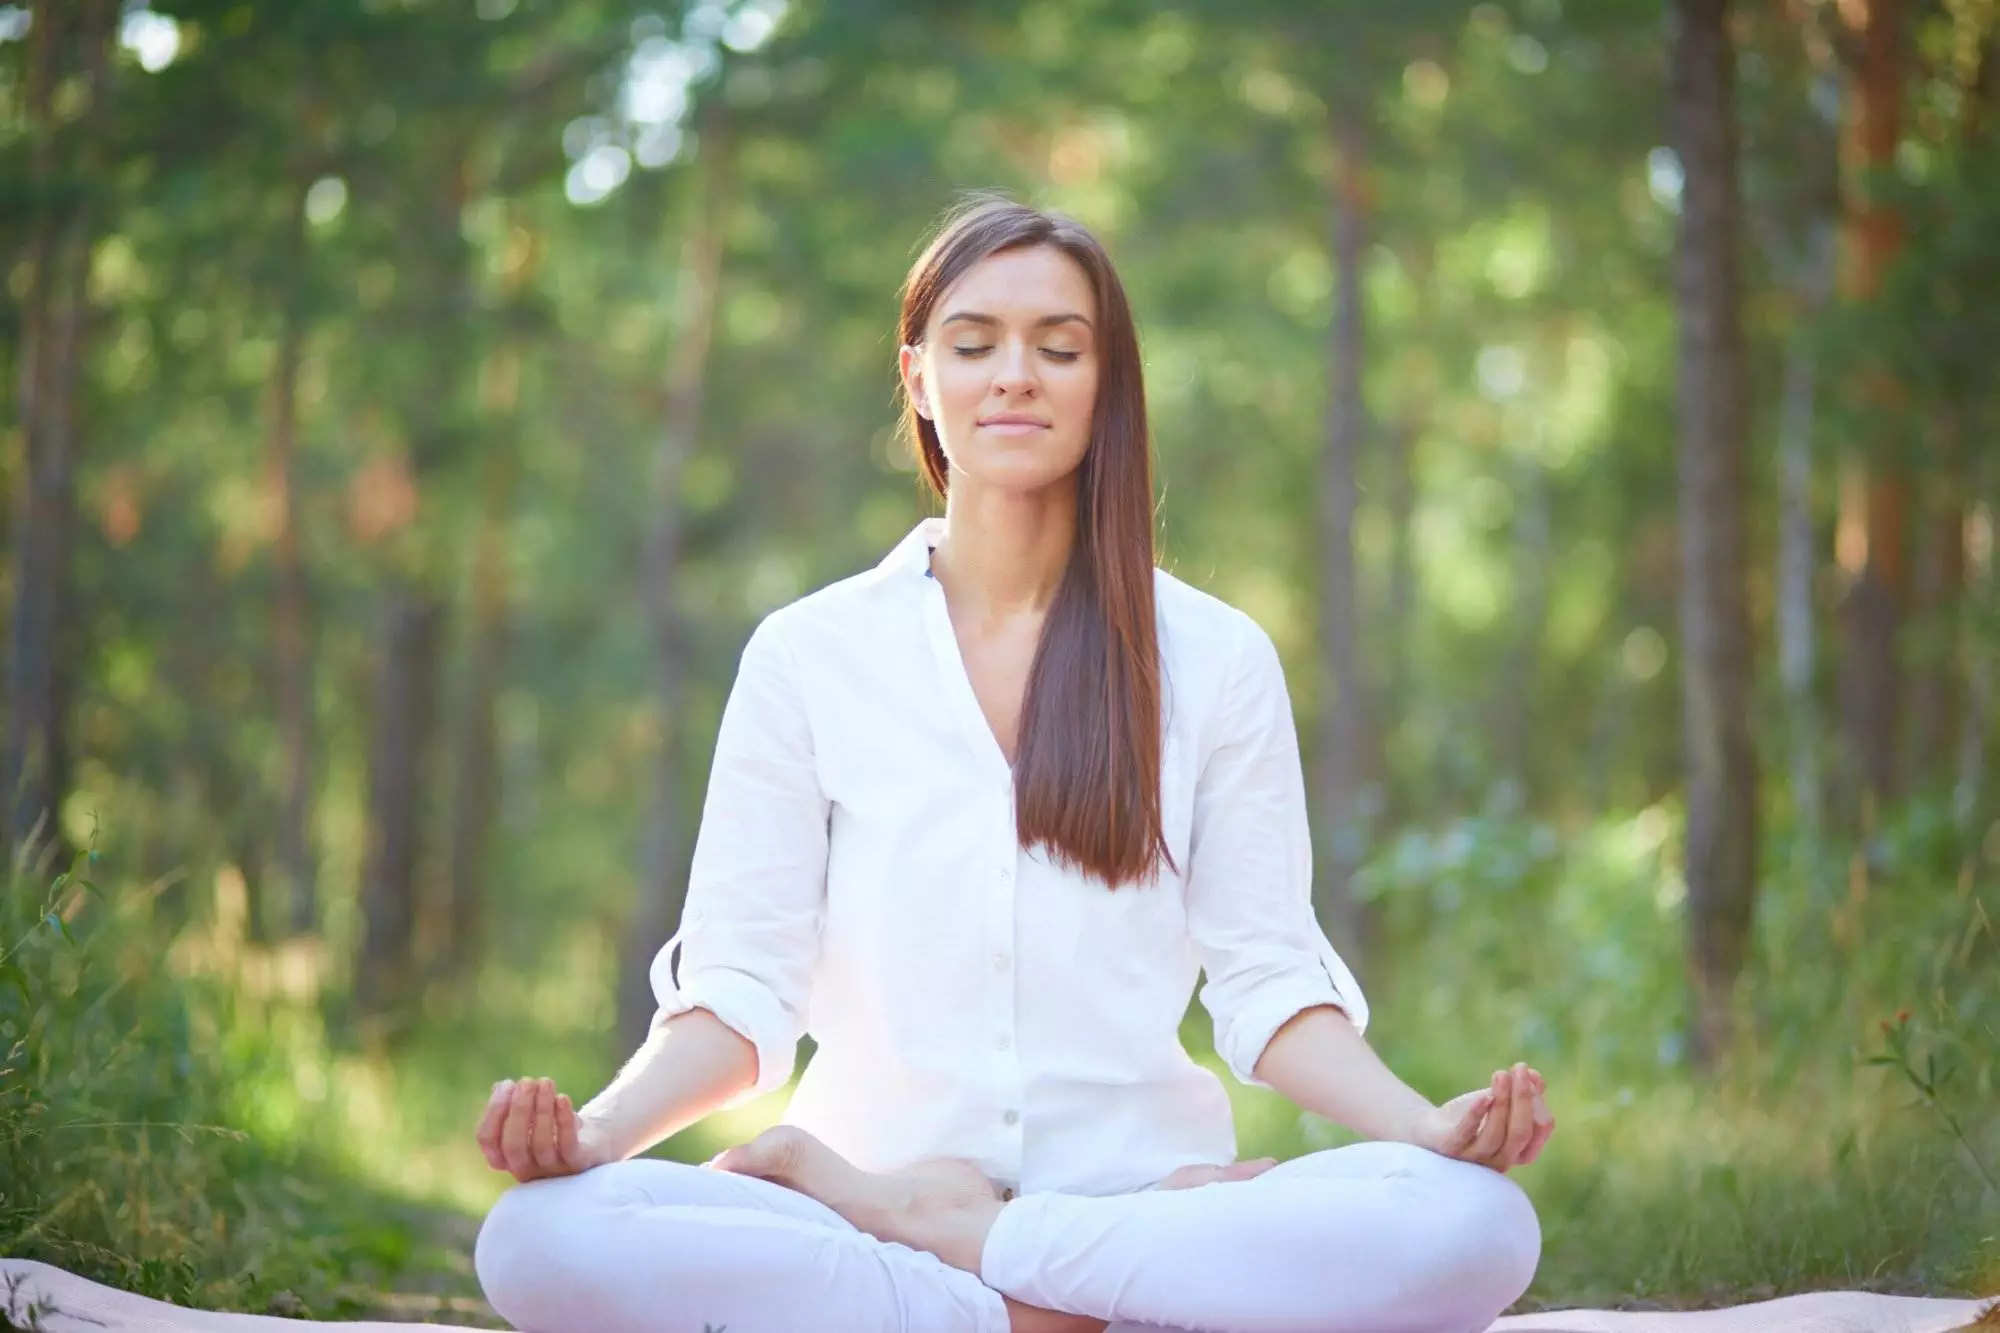 Woman meditating peacefully in sunlit forest.